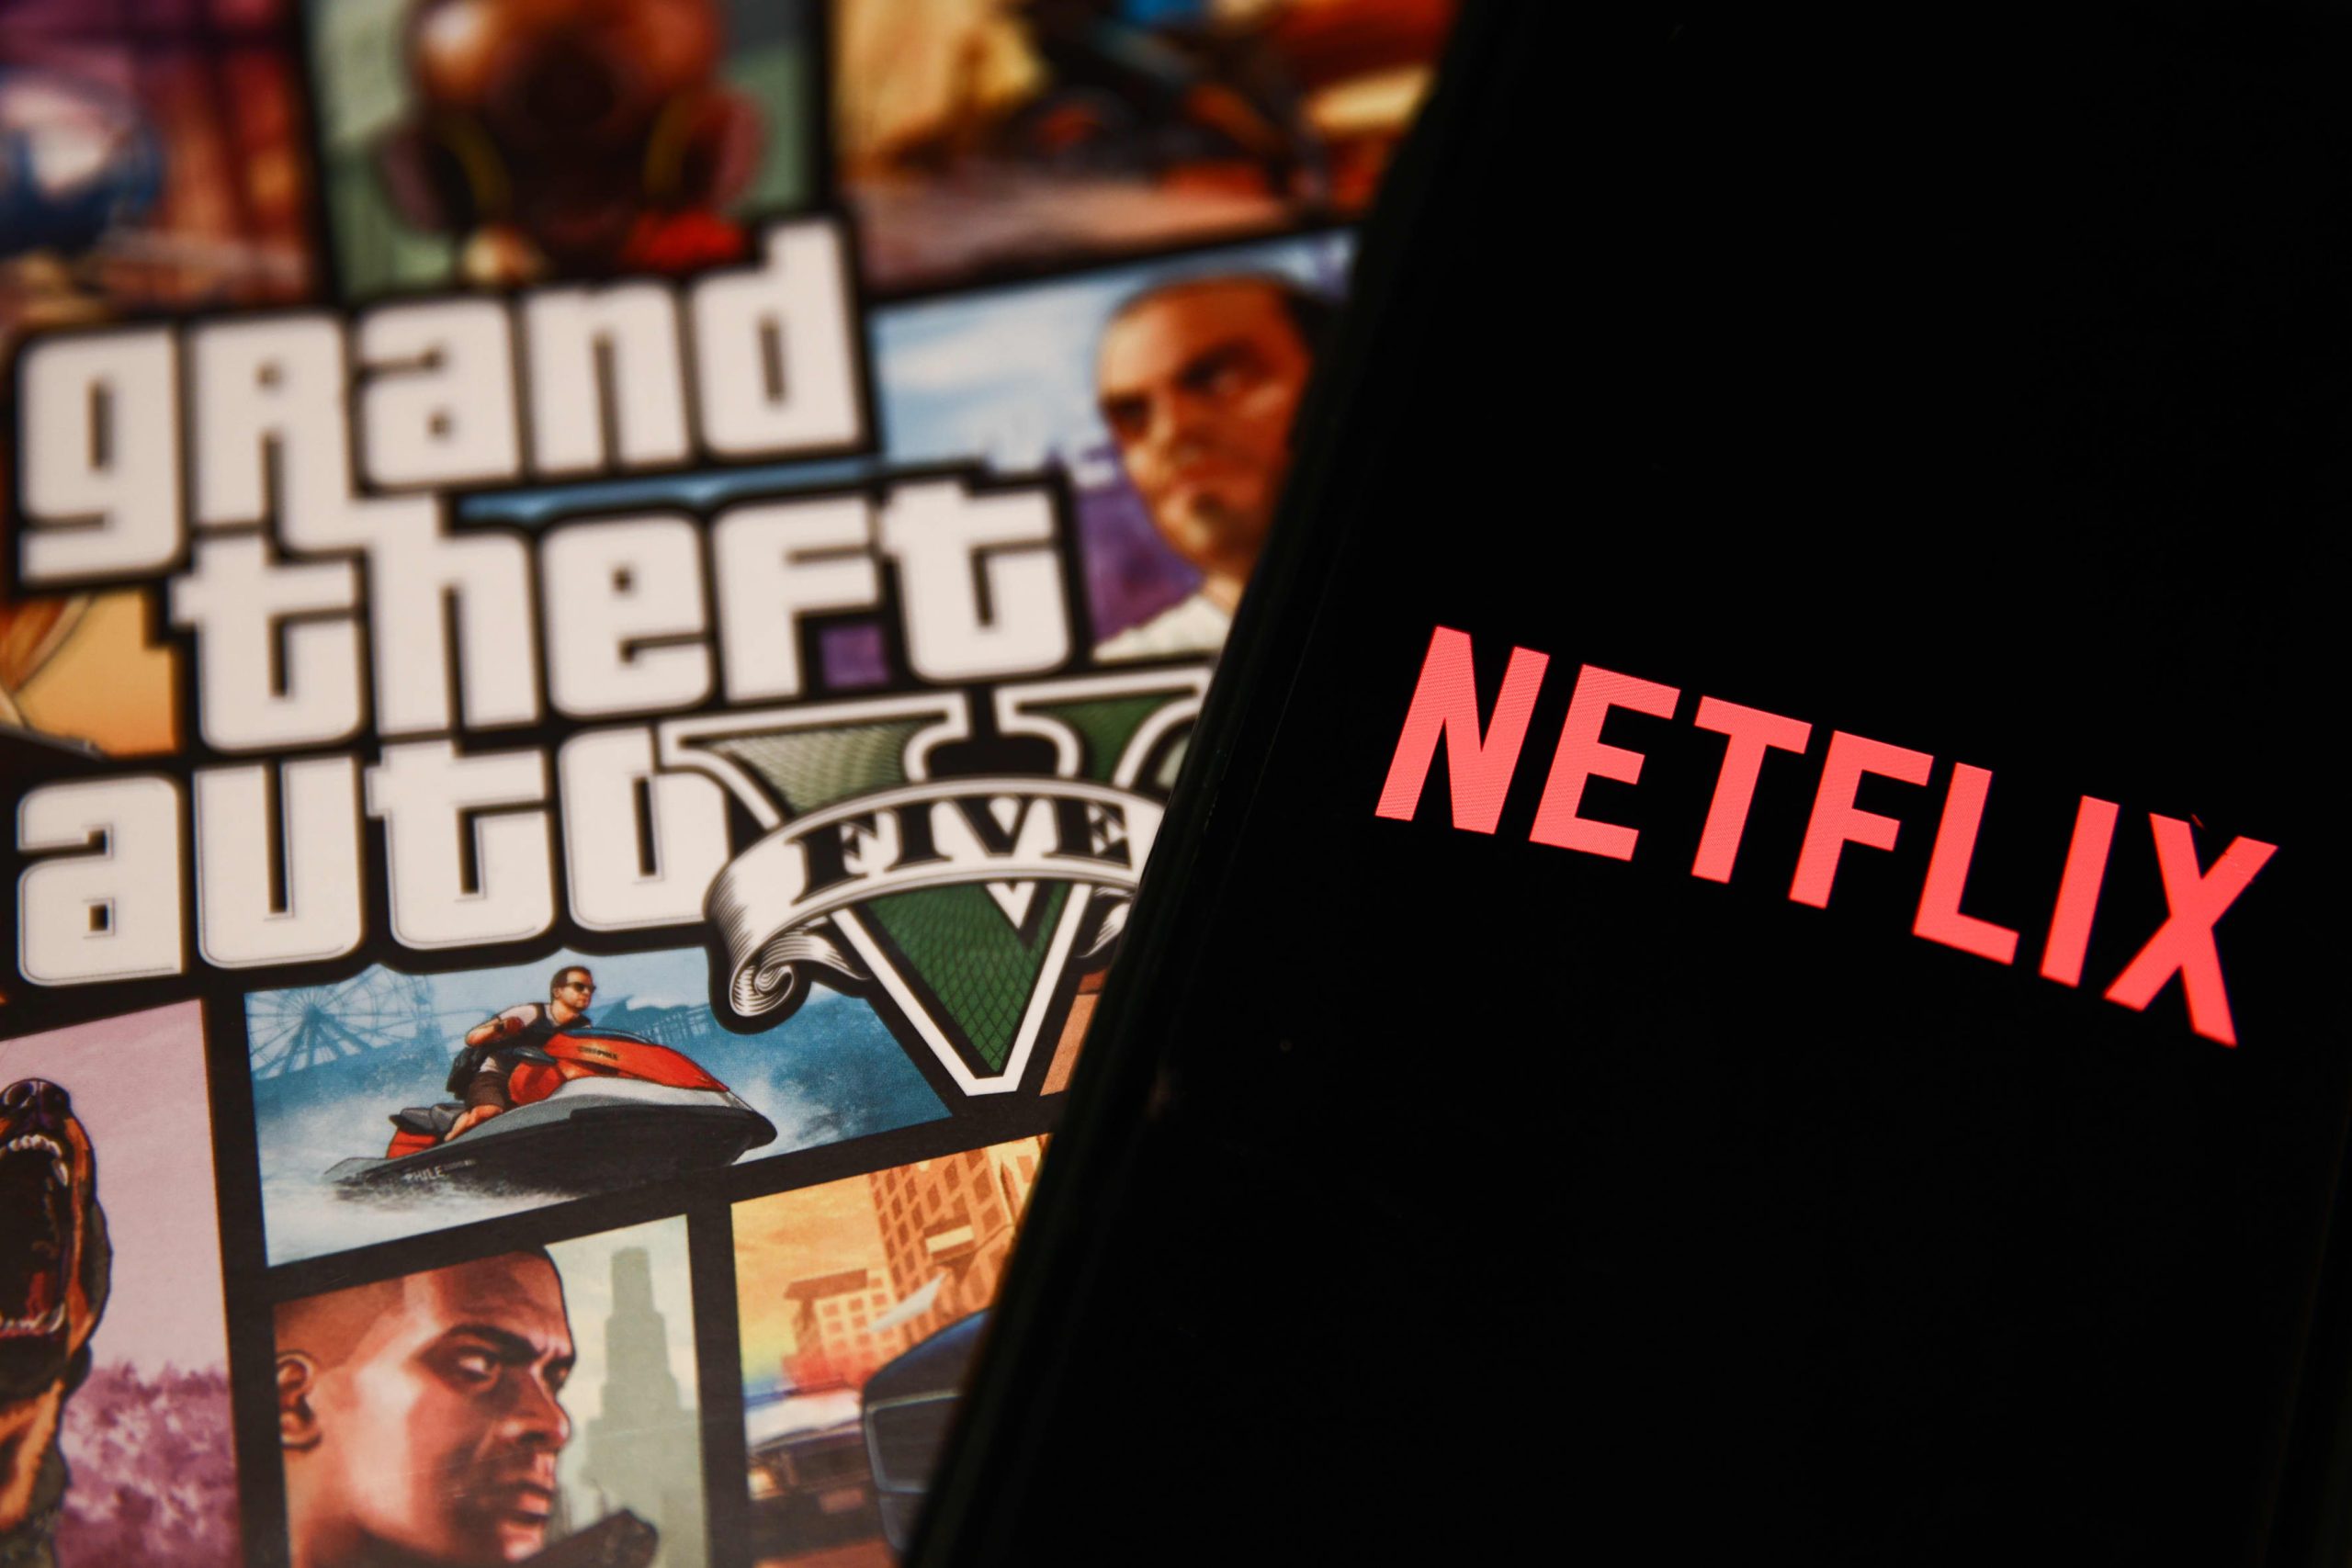 Grand Theft Auto: The Trilogy – The Definitive Edition (GTA III, Vice City,  and San Andreas) are all releasing on Android and iOS for Netflix  subscribers at no extra charge on December